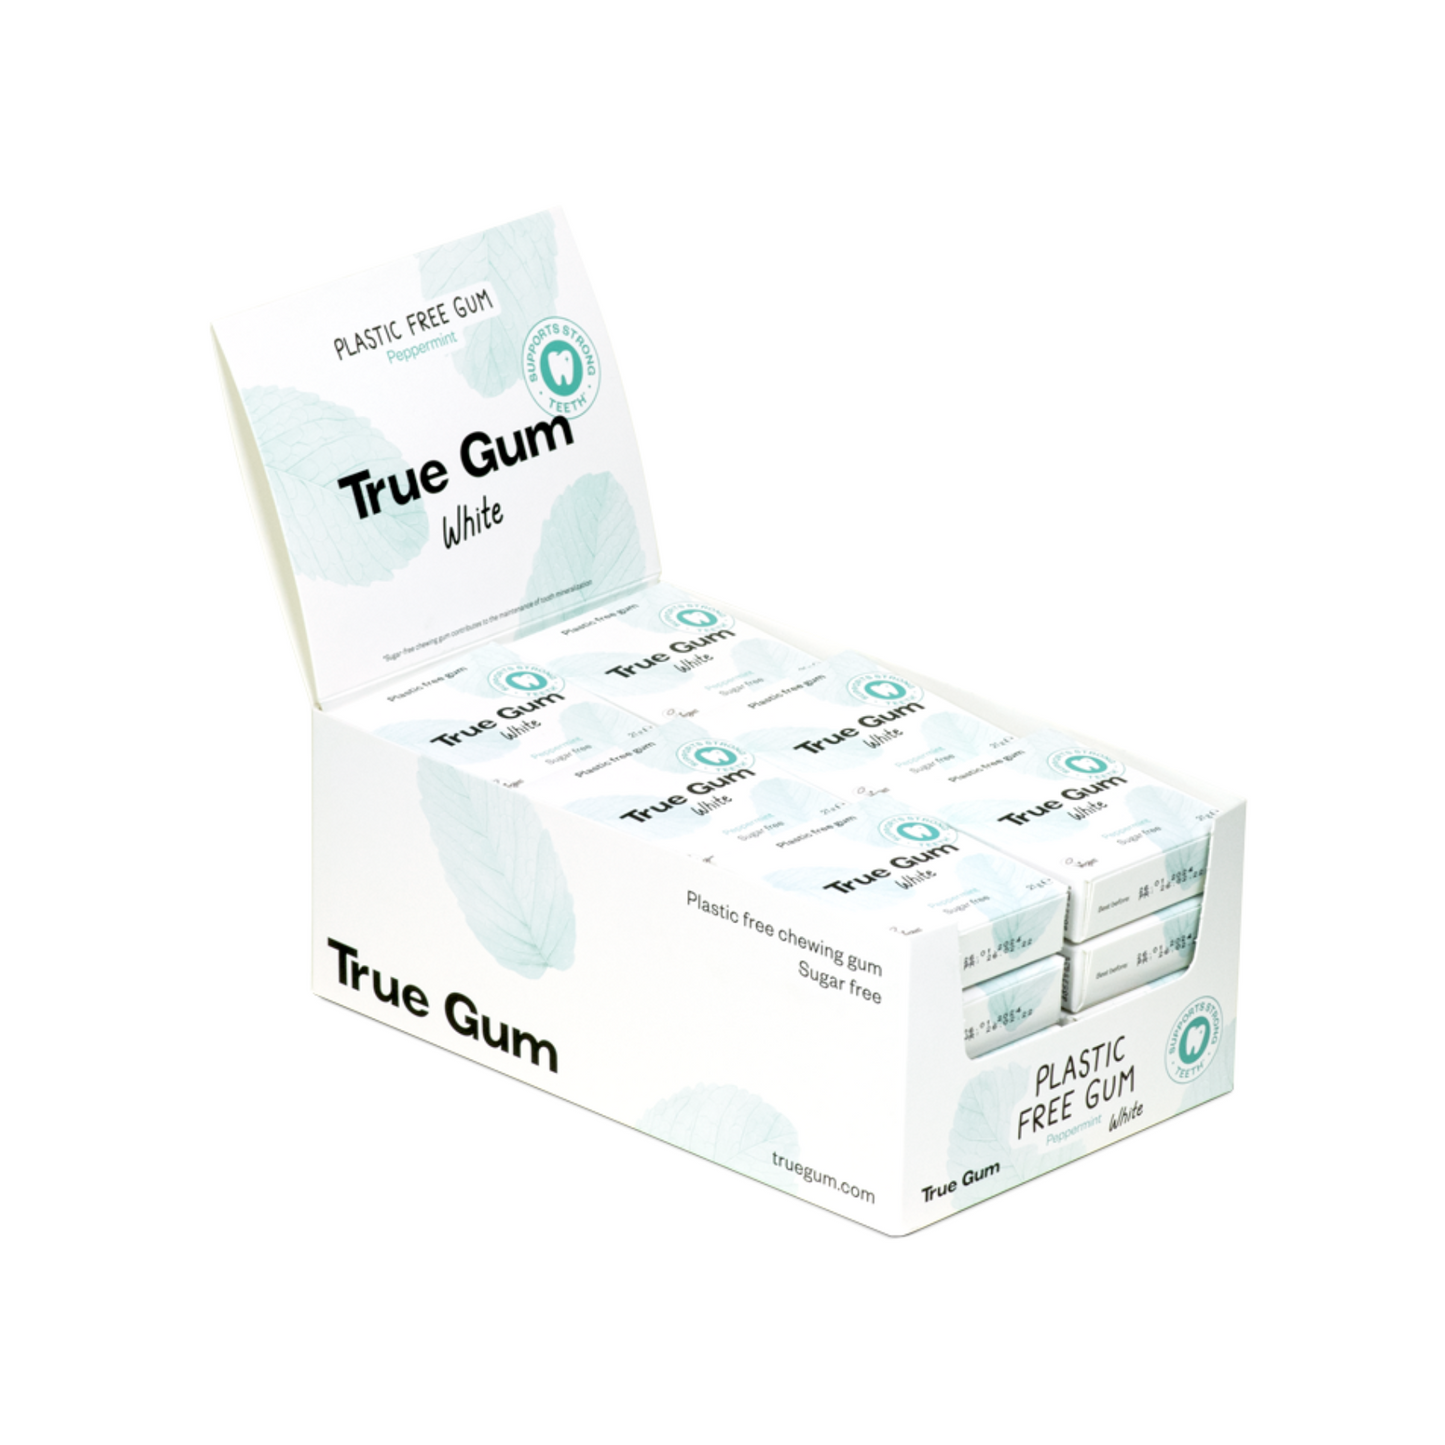 True Gum Plastic & Sugar Free Gum Single Pack (21g) Or A Box Of 24, Whitening Peppermint Flavour